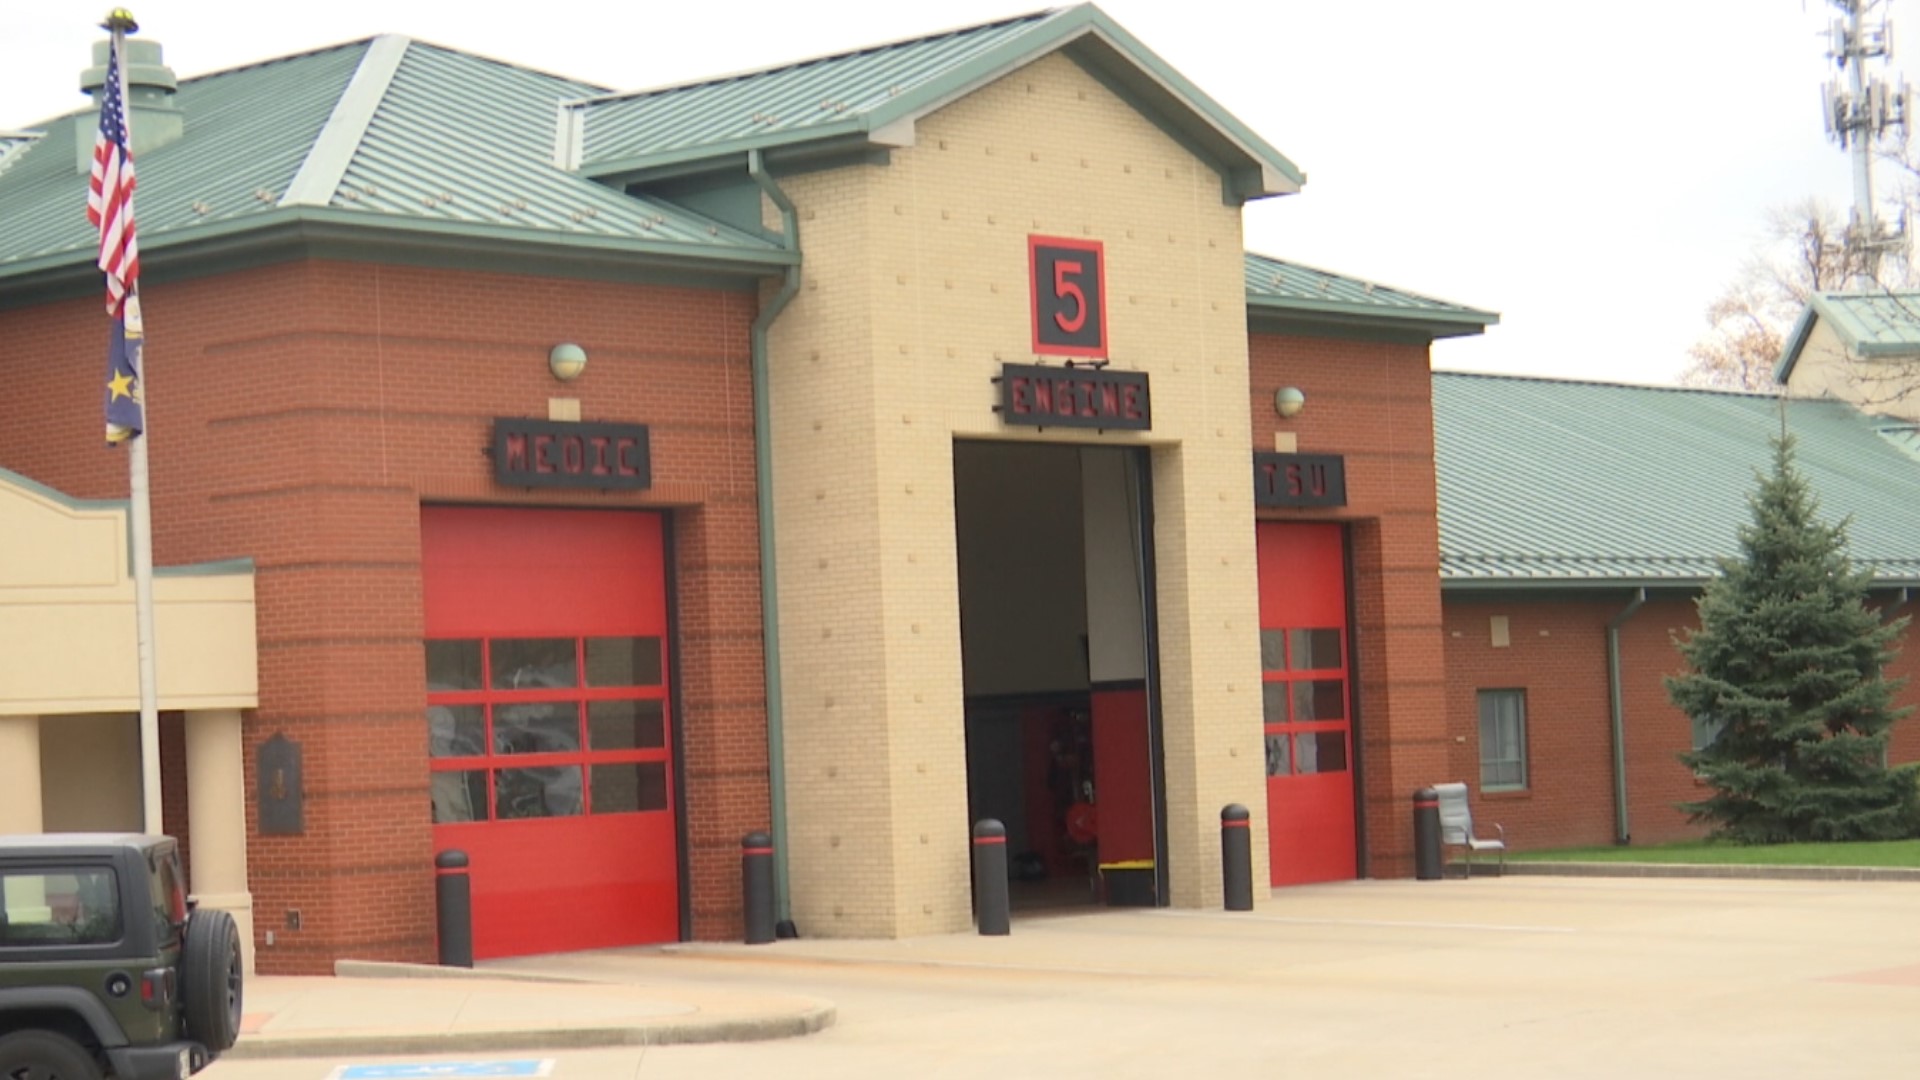 A healthy baby boy was left in the Safe Haven Baby Box at Carmel Fire Station 45, the third child left at the station since April 5.